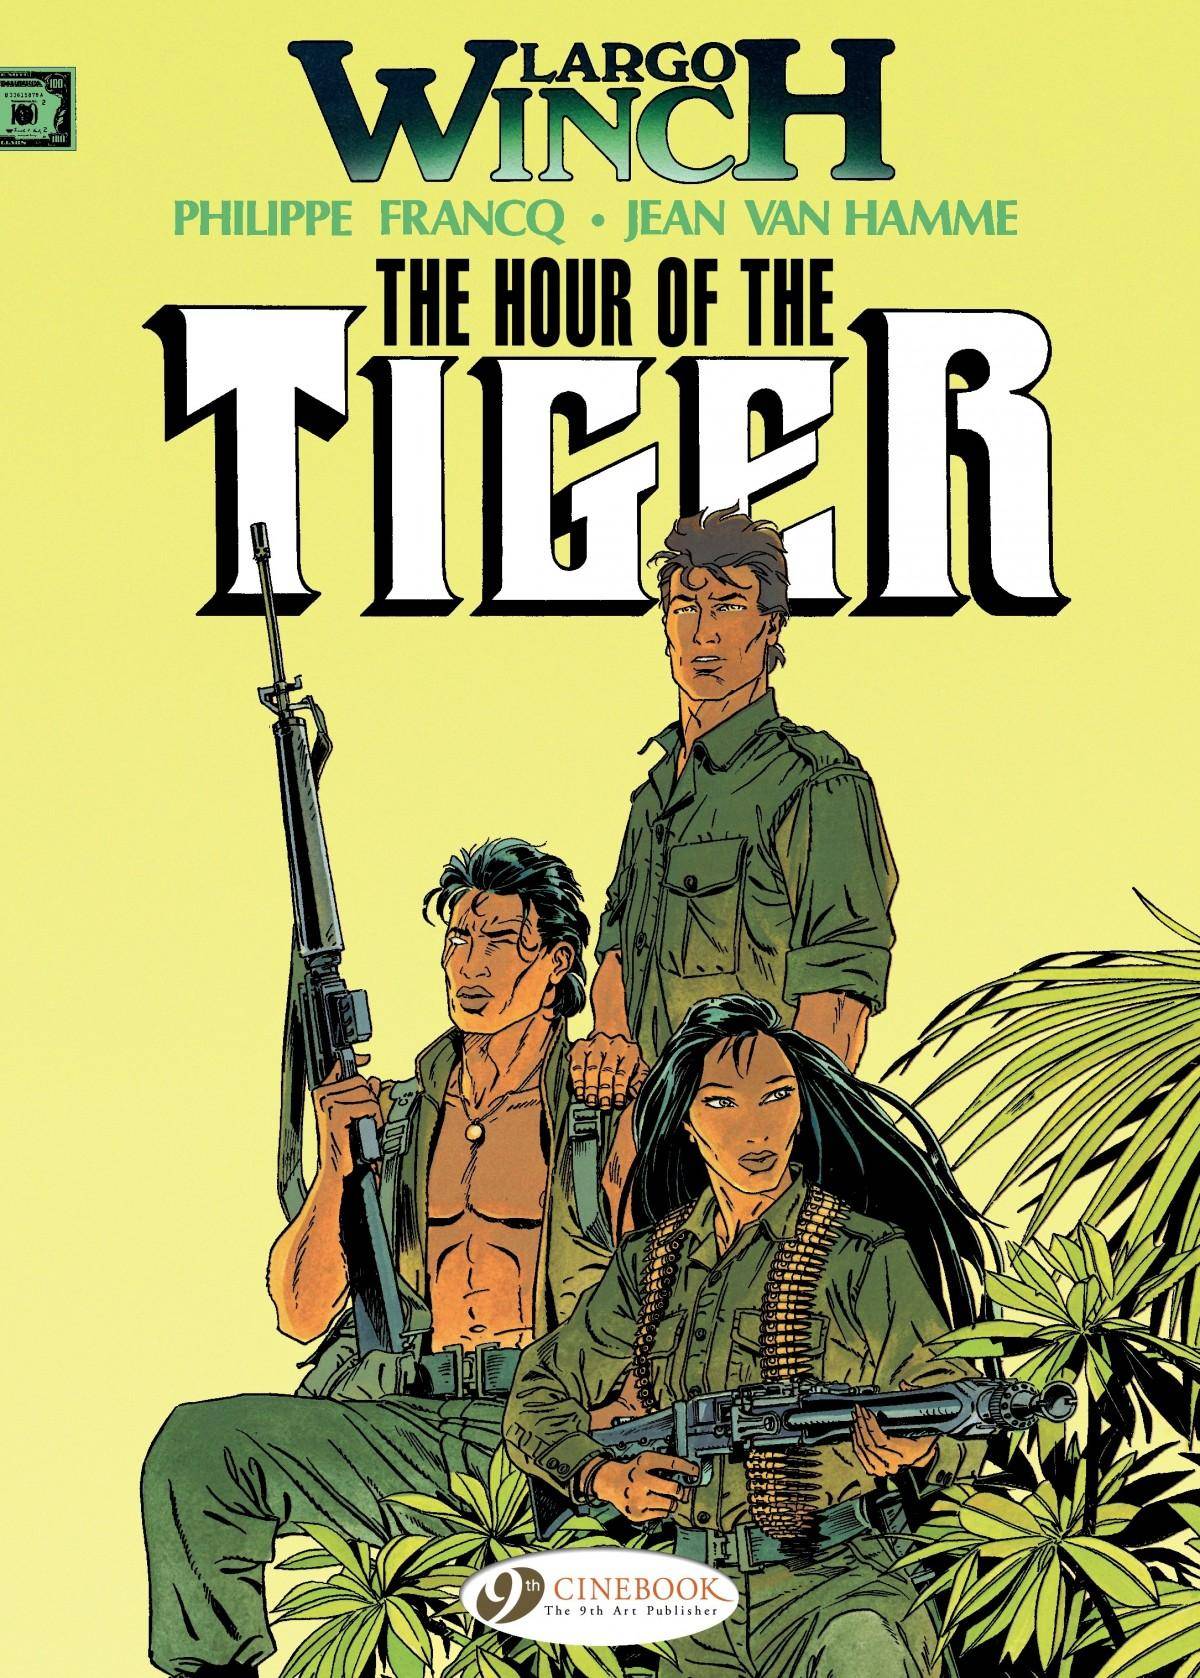 Largo Winch 004 - Fort Makiling - The Hour of the Tiger 2009 Cinebook digital